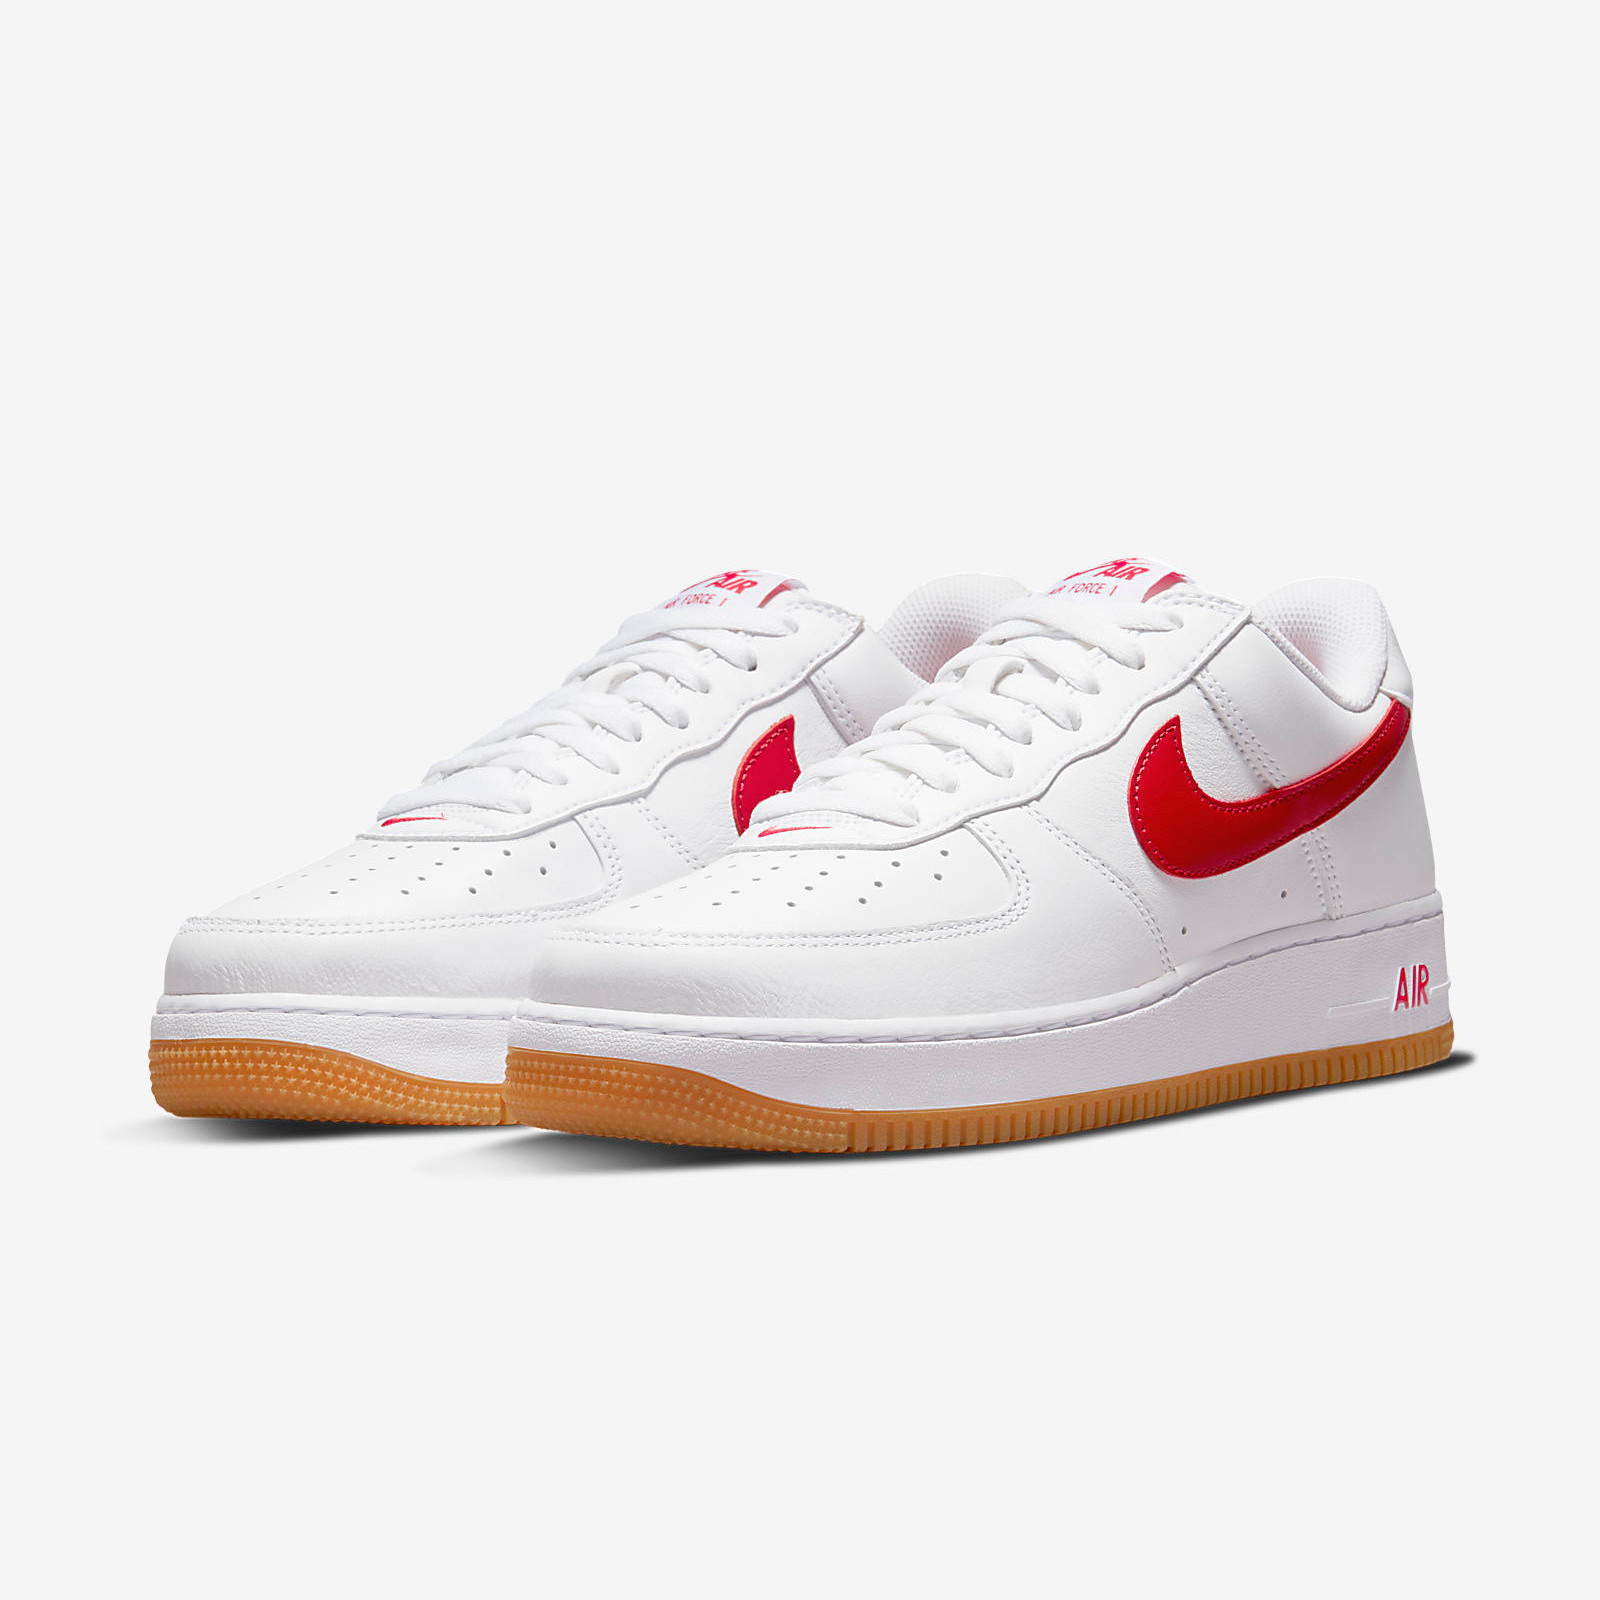 Nike Air Force 1 Low
Color of the Month
« University Red »